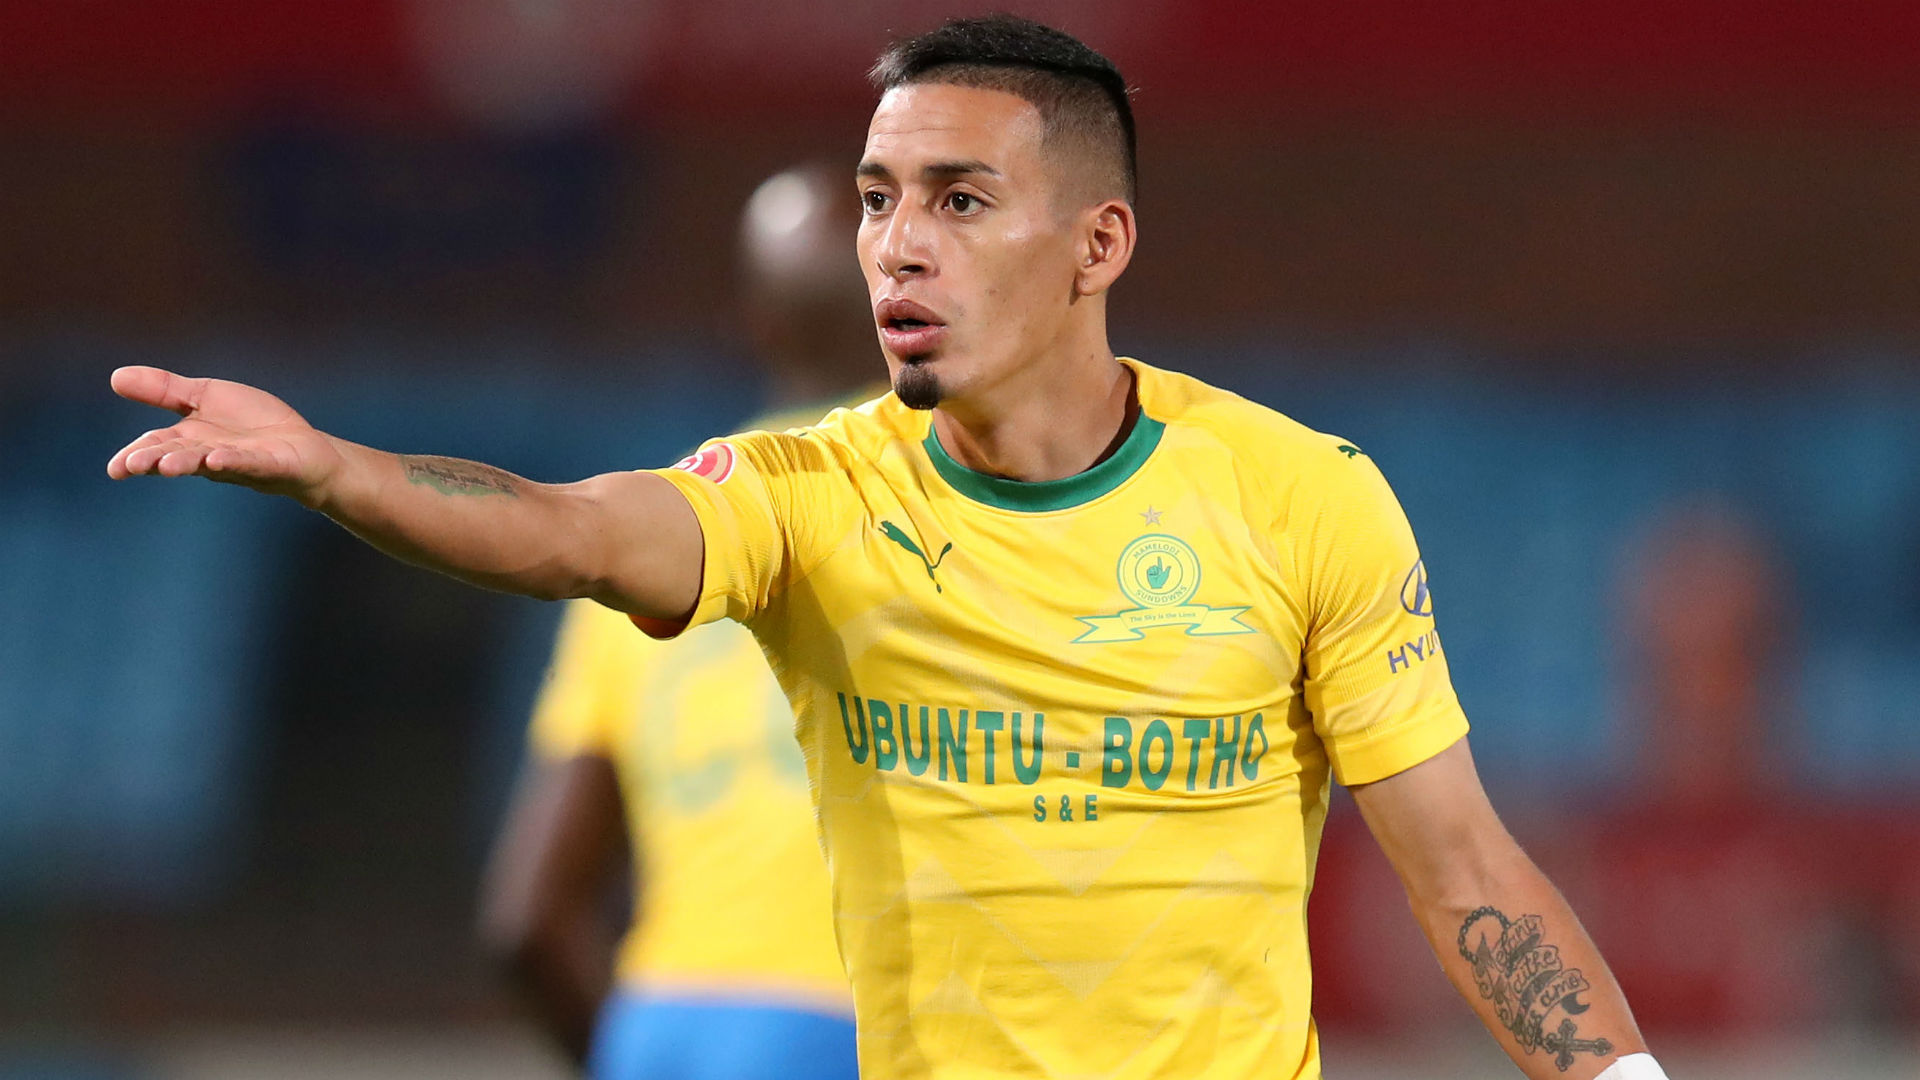 Mamelodi Sundowns attacker Sirino found guilty of assault, slapped with two-match ban